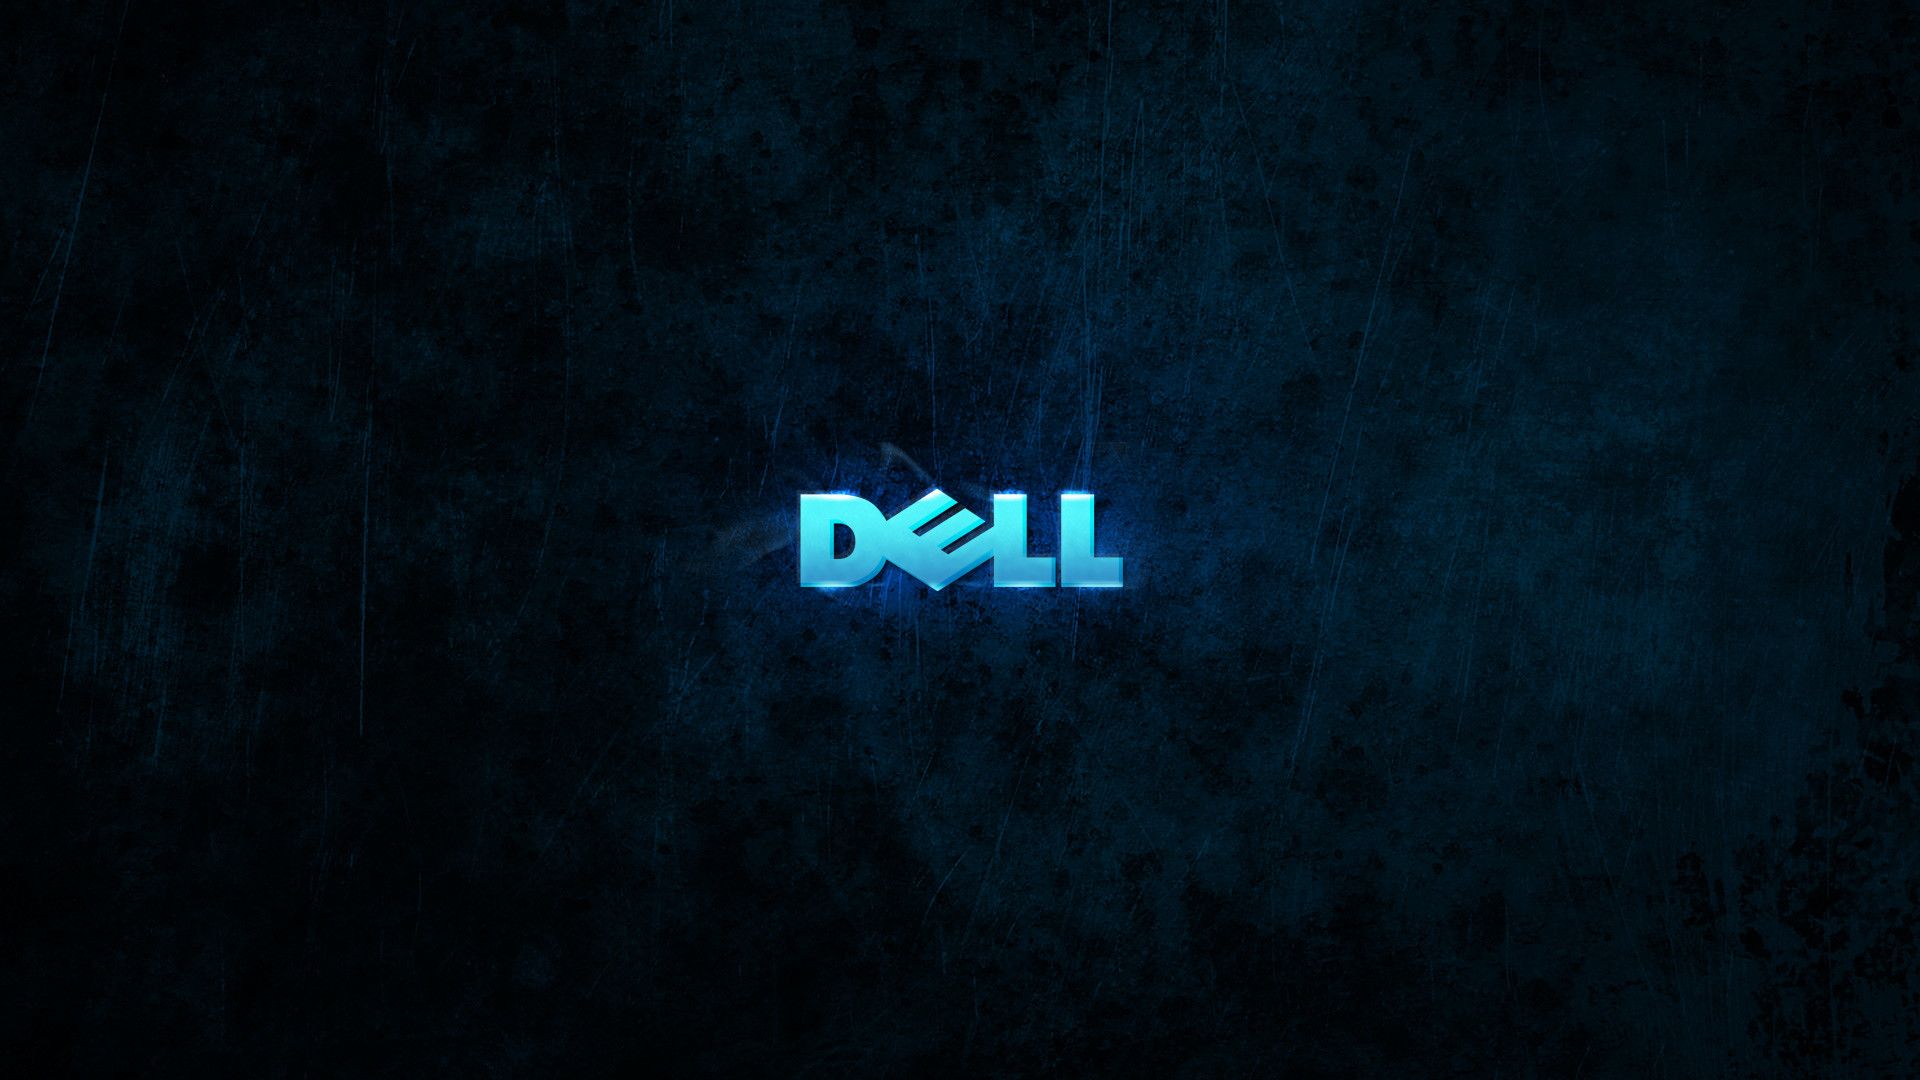 Dell Laptop Wallpapers